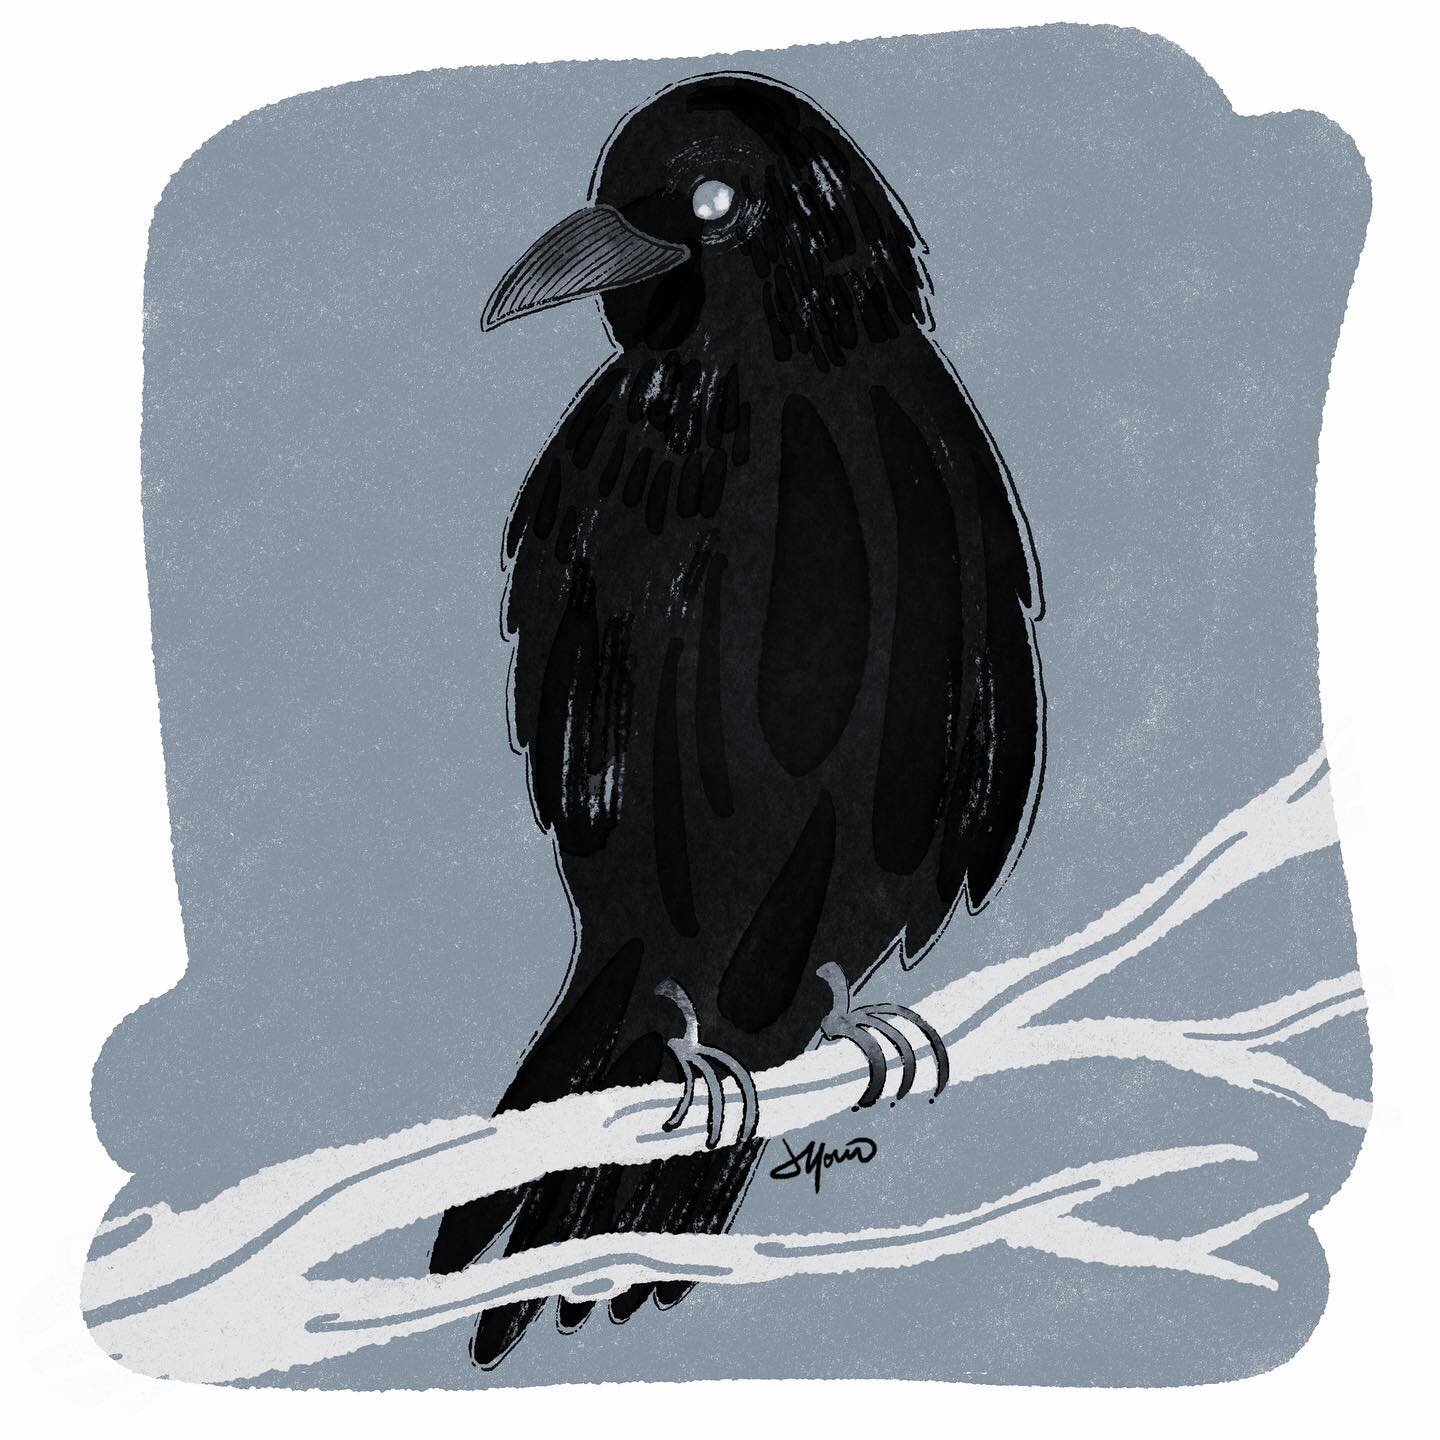 Redoing some stuff. It was super snowy recently and it made me want to draw winter crows all the time. And now I have flowers poking out so 🤷🏻&zwj;♀️